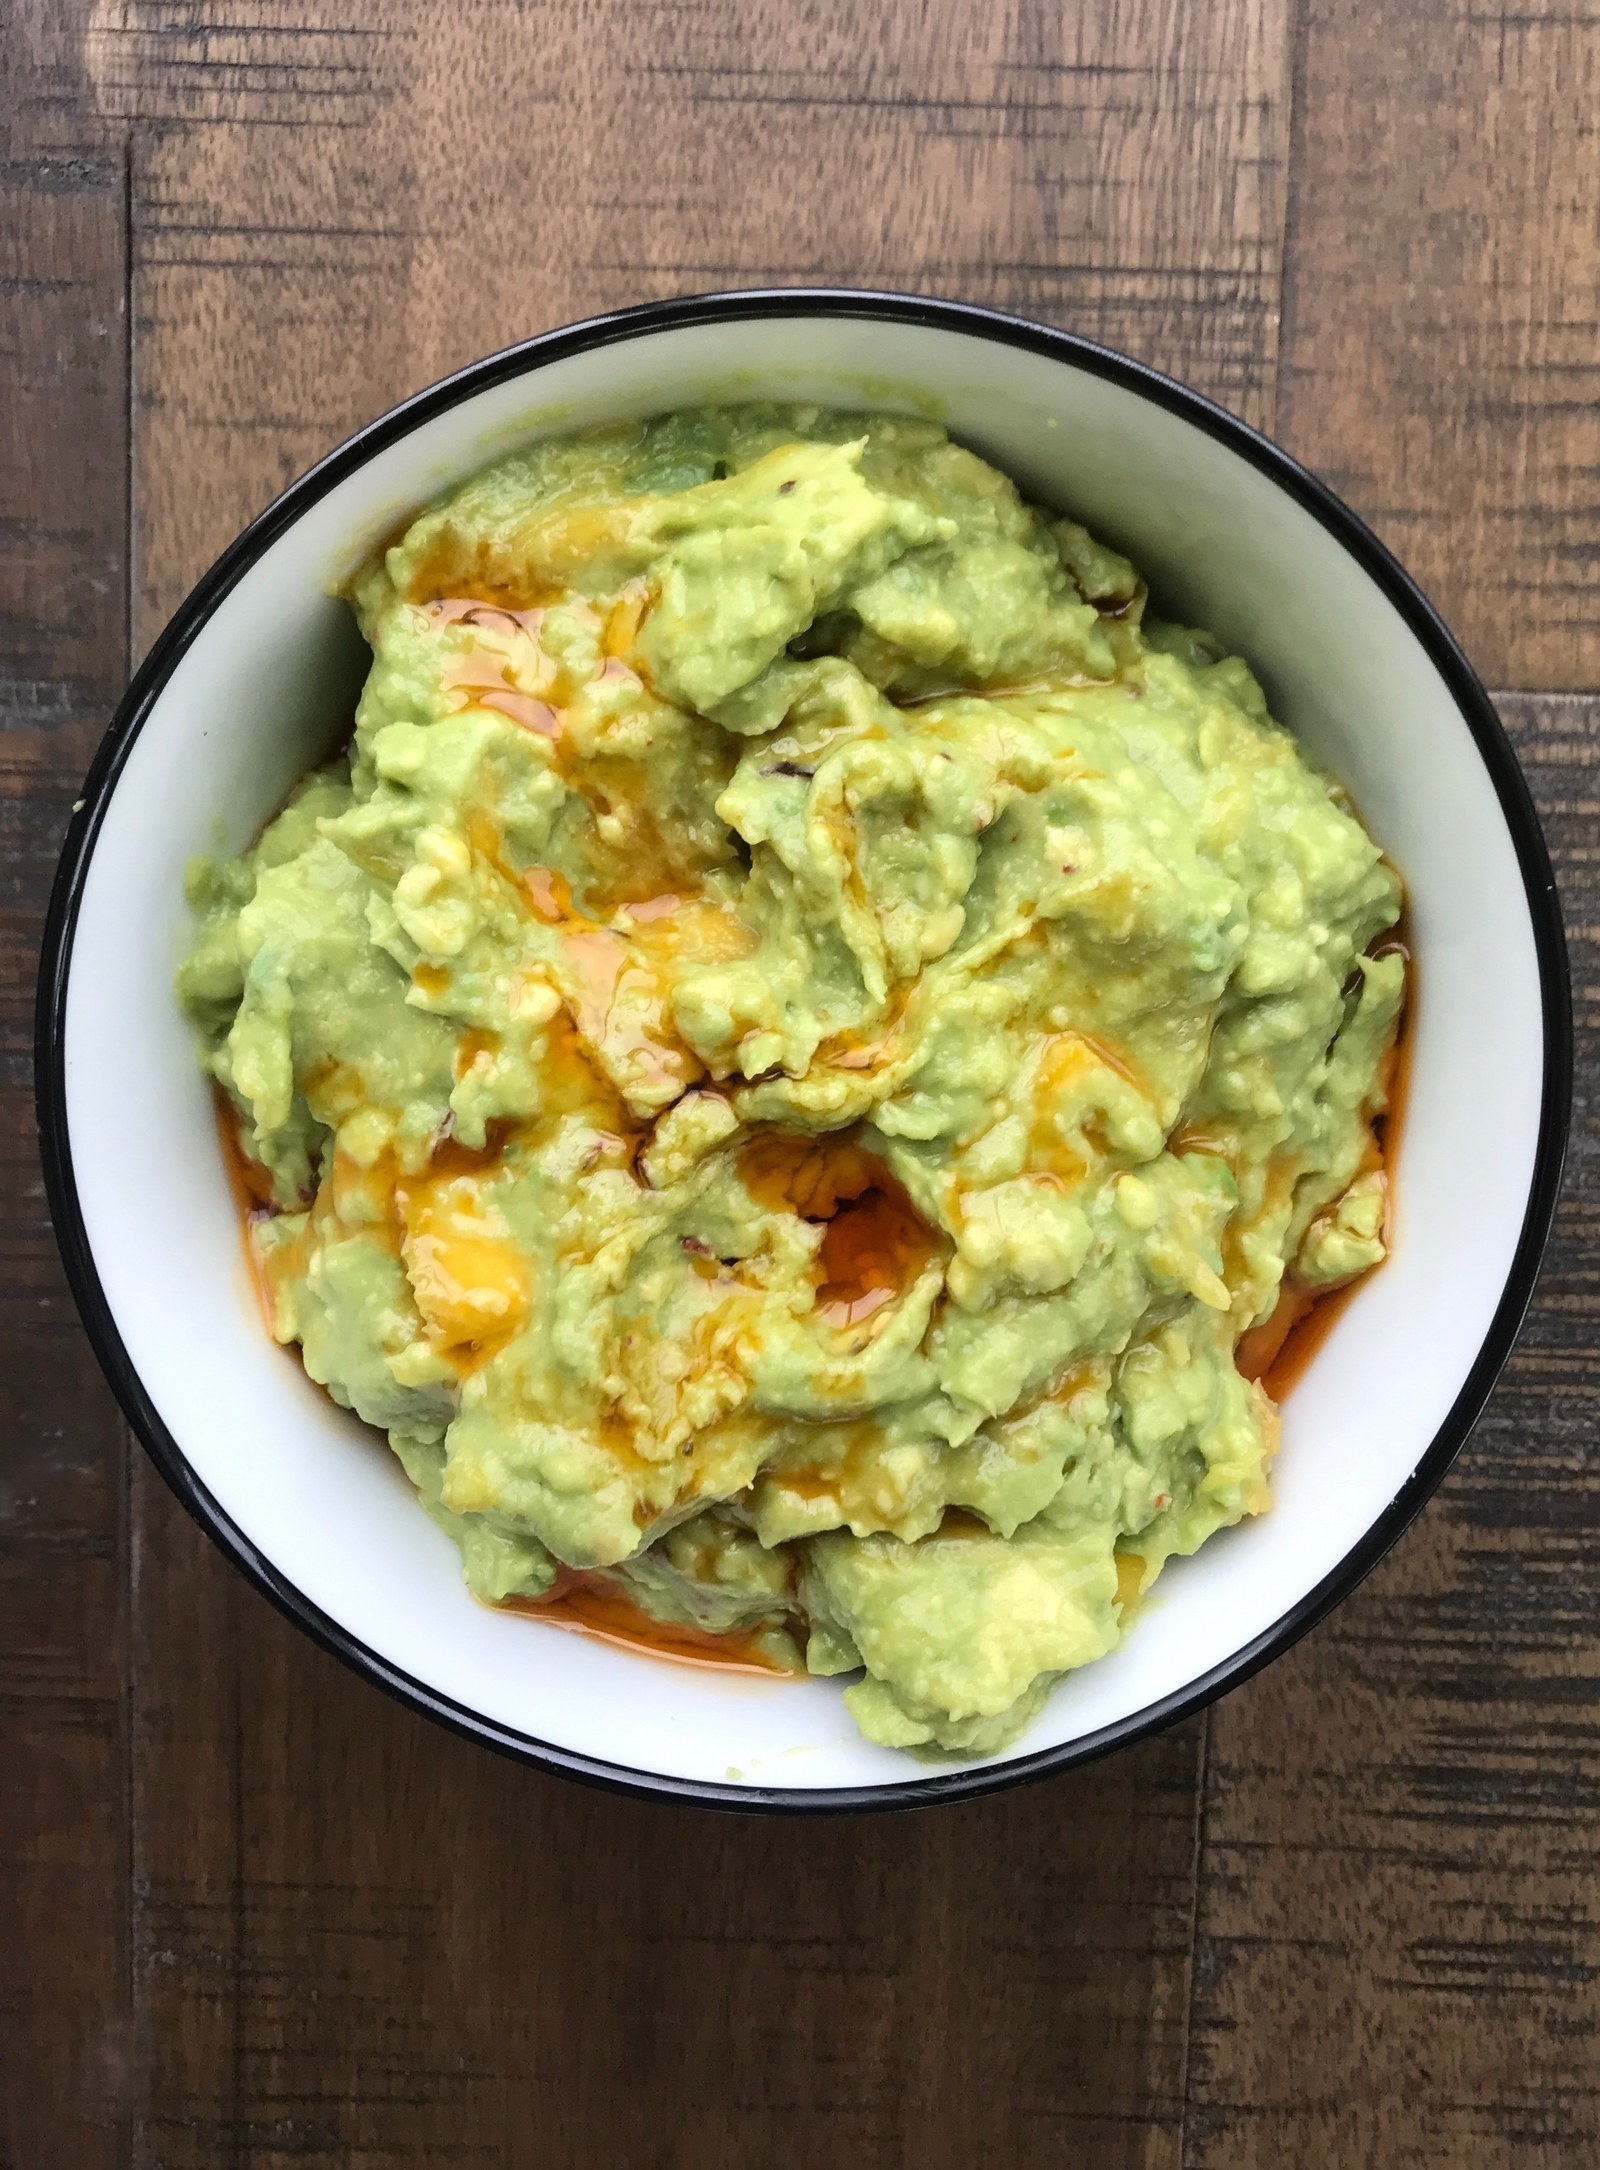 Guacamole topped with chili oil